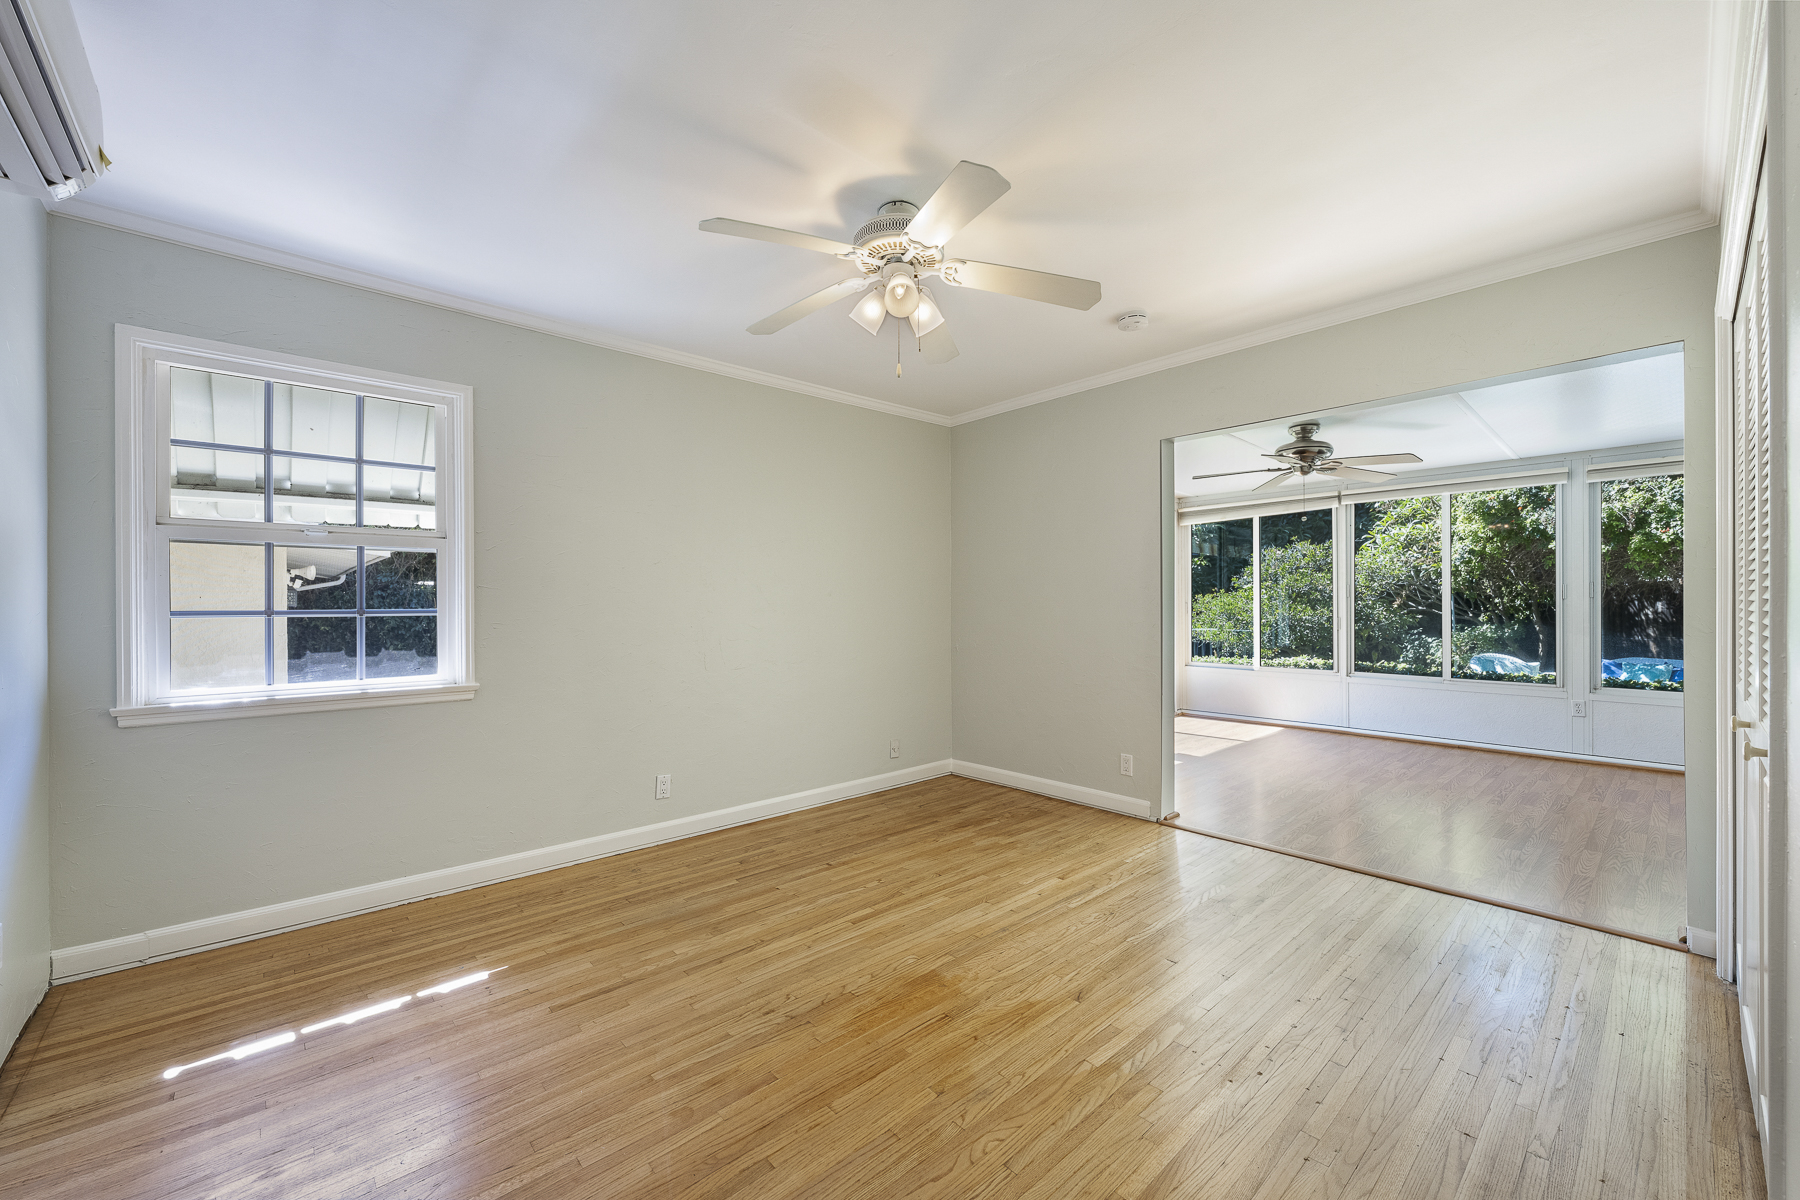 411 Truman Ave, Fullerton, CA 92832: Interior view of living space and glass window room.